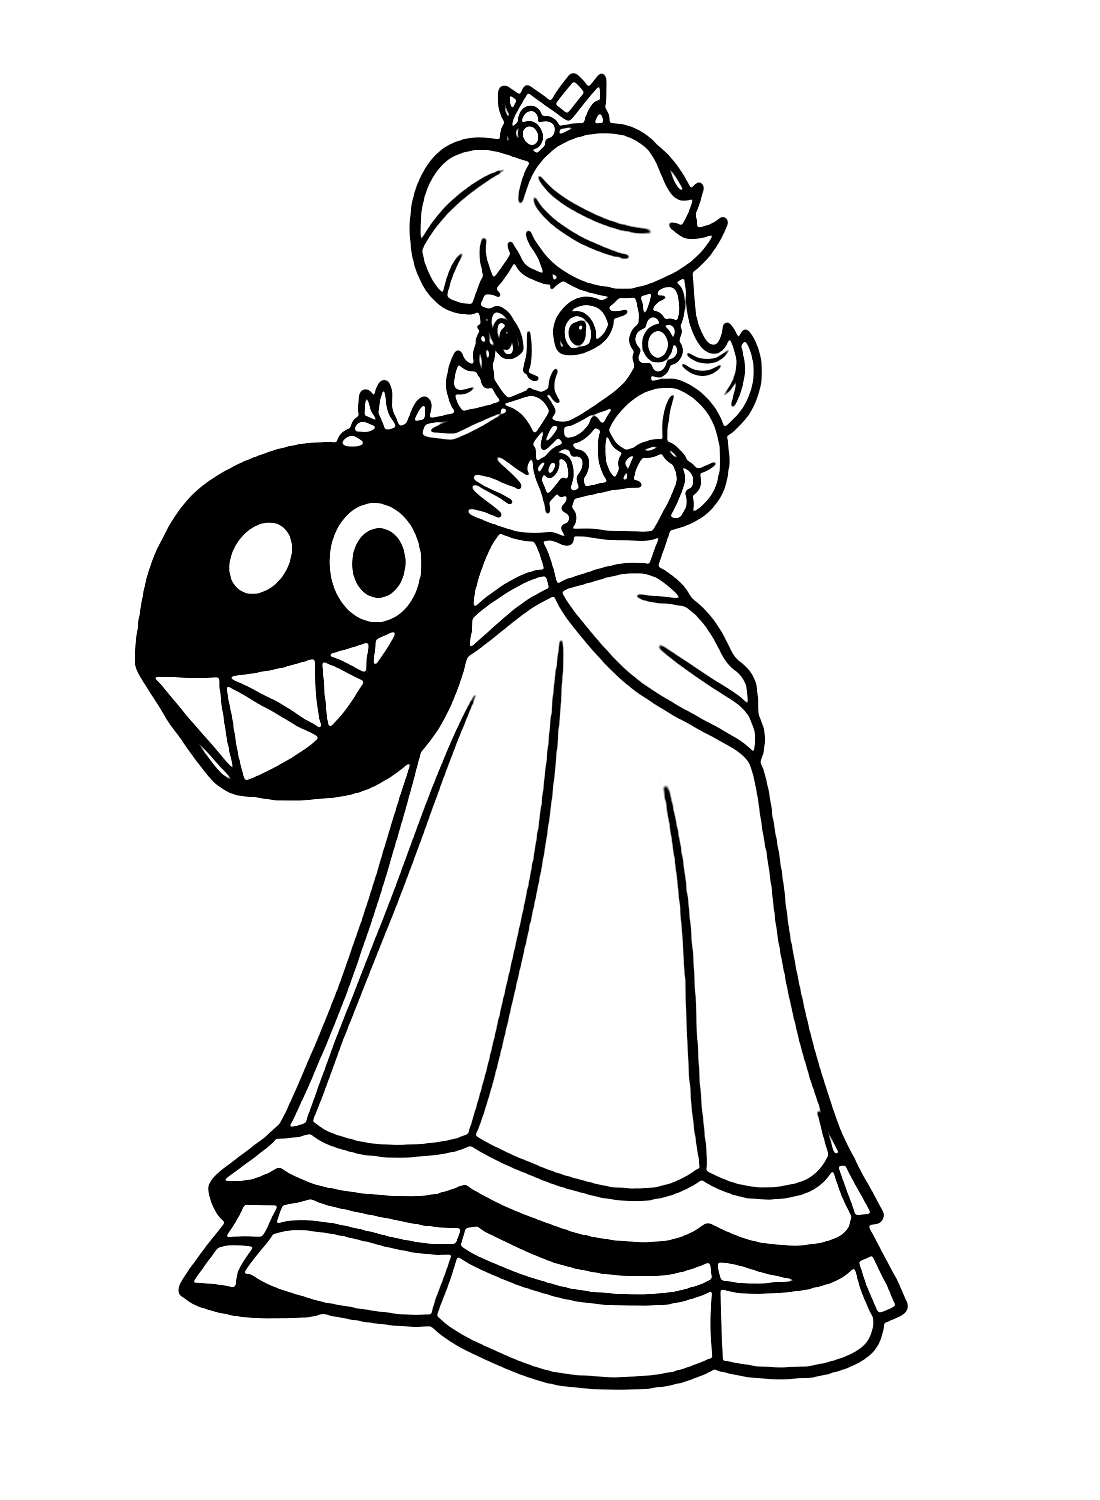 Princess Daisy in Super Mario Coloring Pages